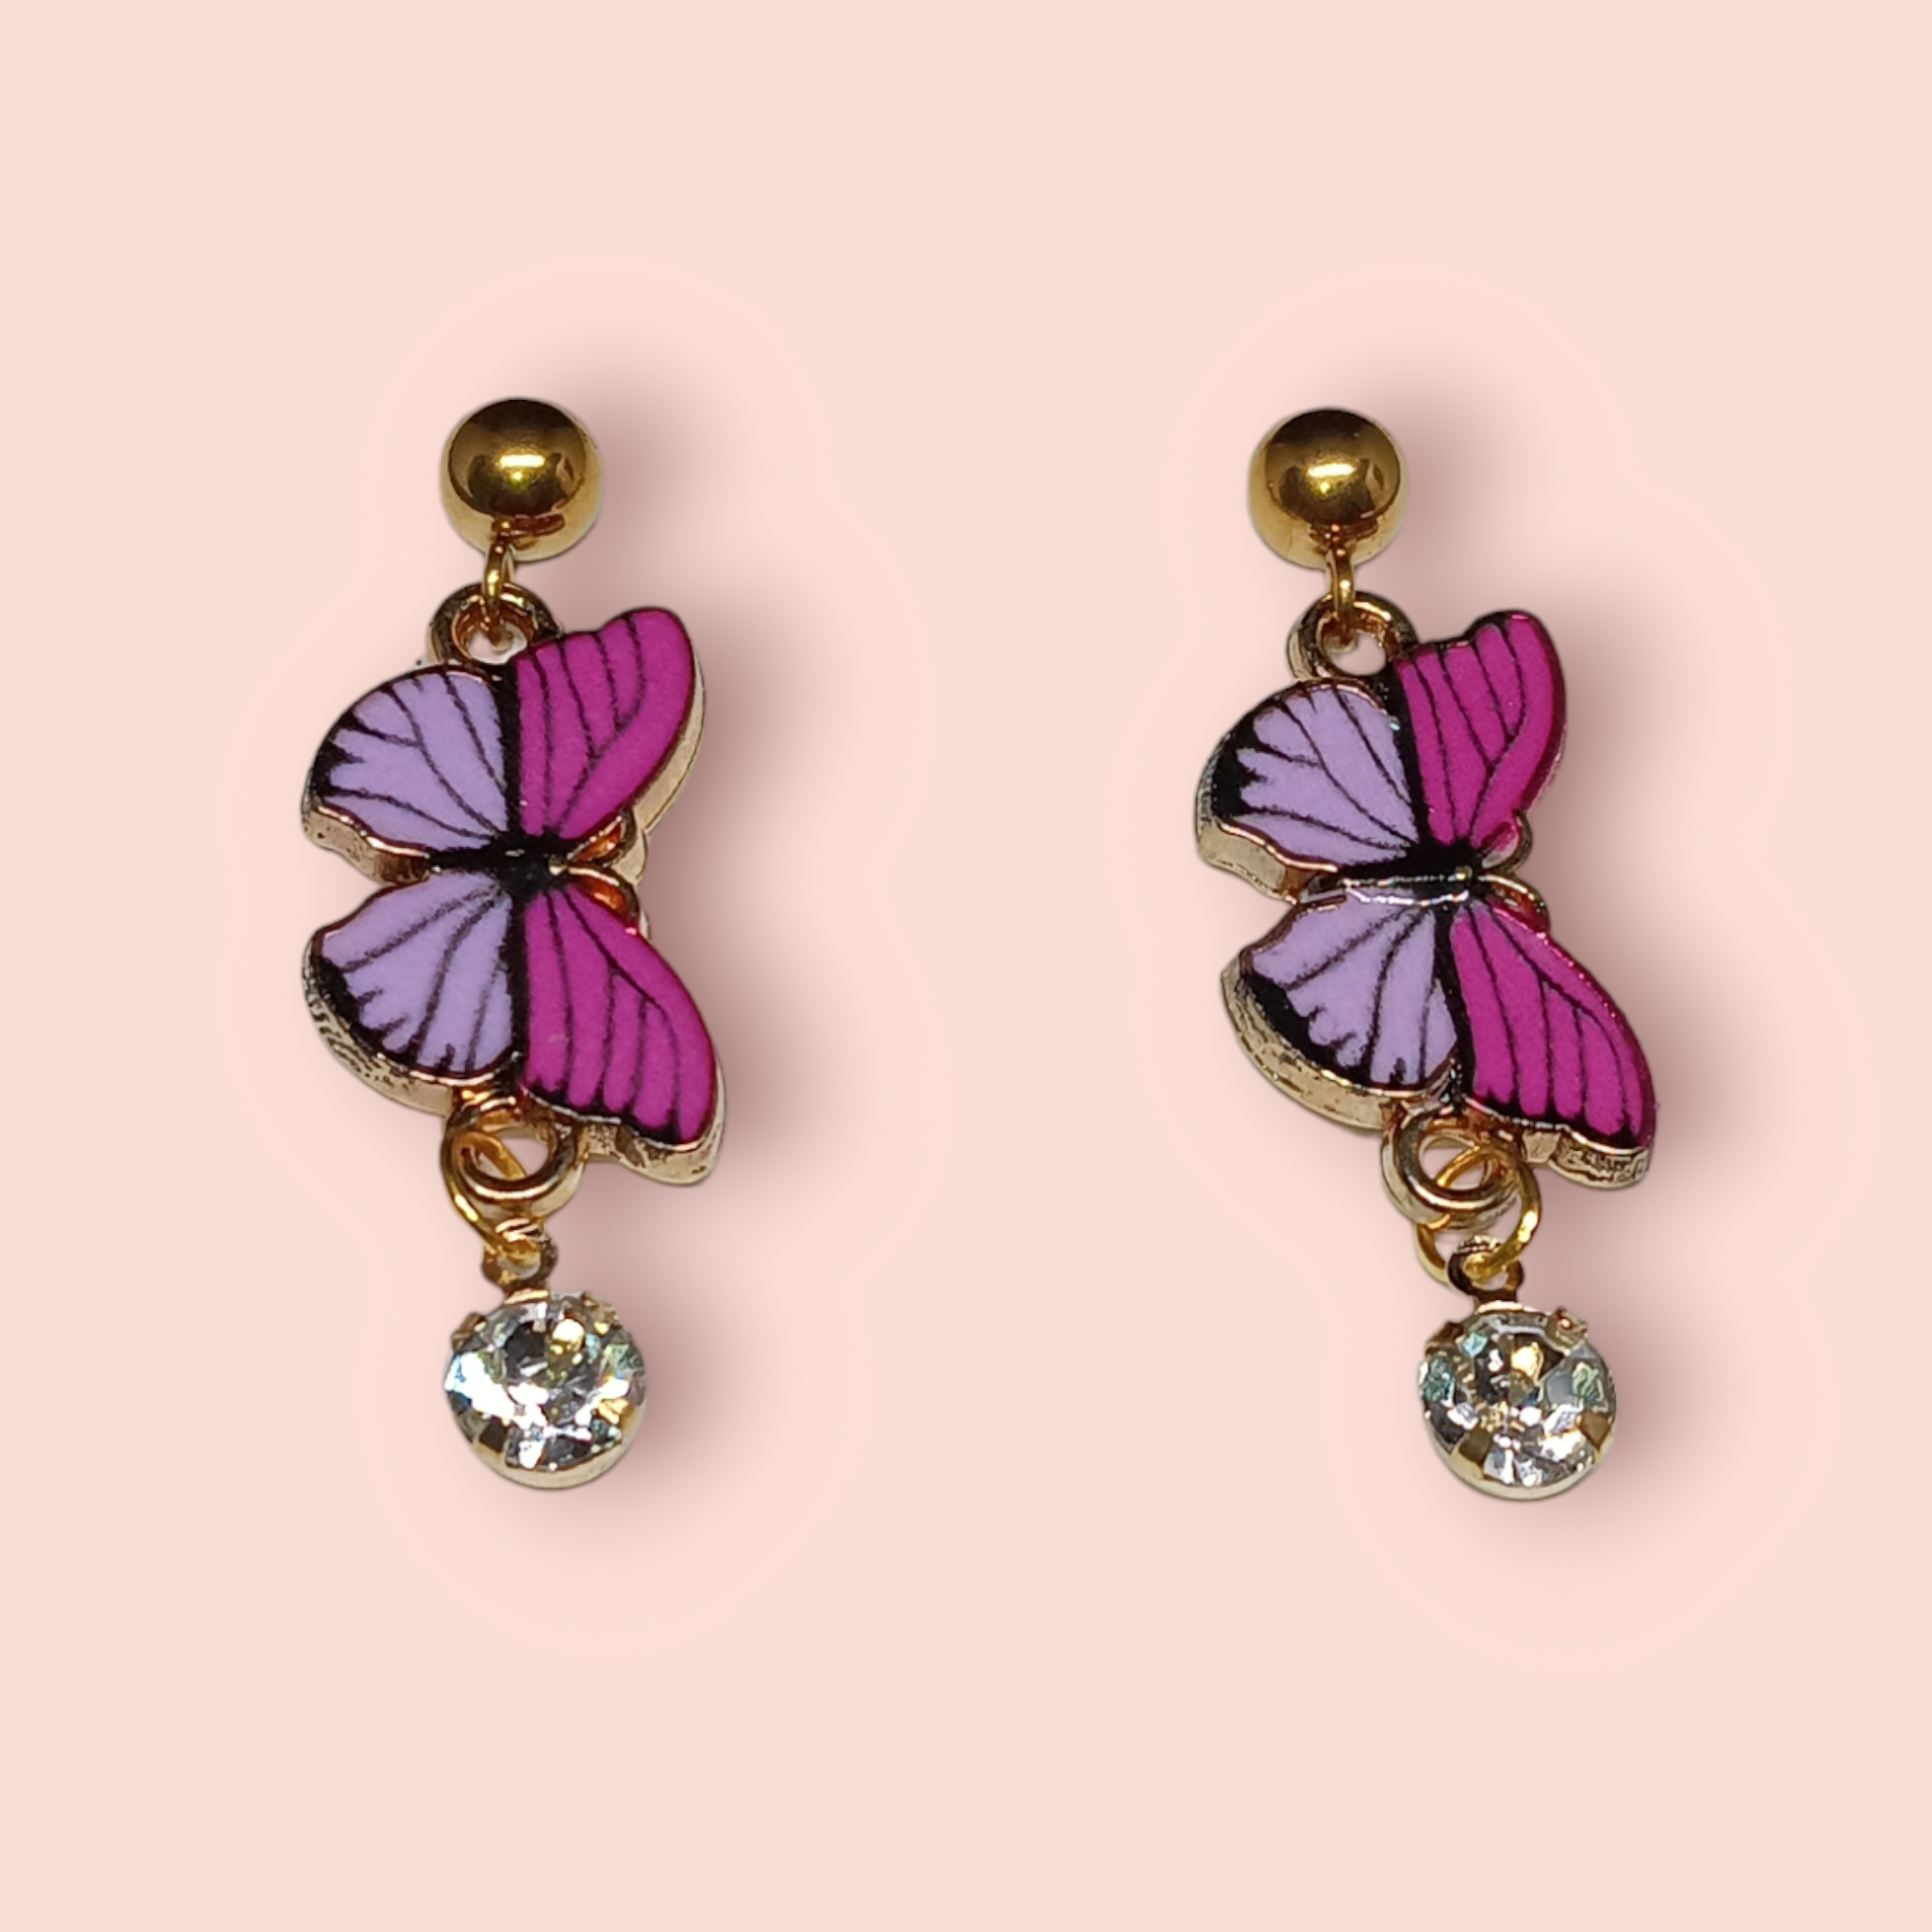 Buy Dainty Butterfly Stud Earrings, Gold and Silver Butterfly Stud Earrings,  Small Stud Earrings, Butterfly Stud, Minimalist Earrings, Cute Stud Online  in India - Etsy